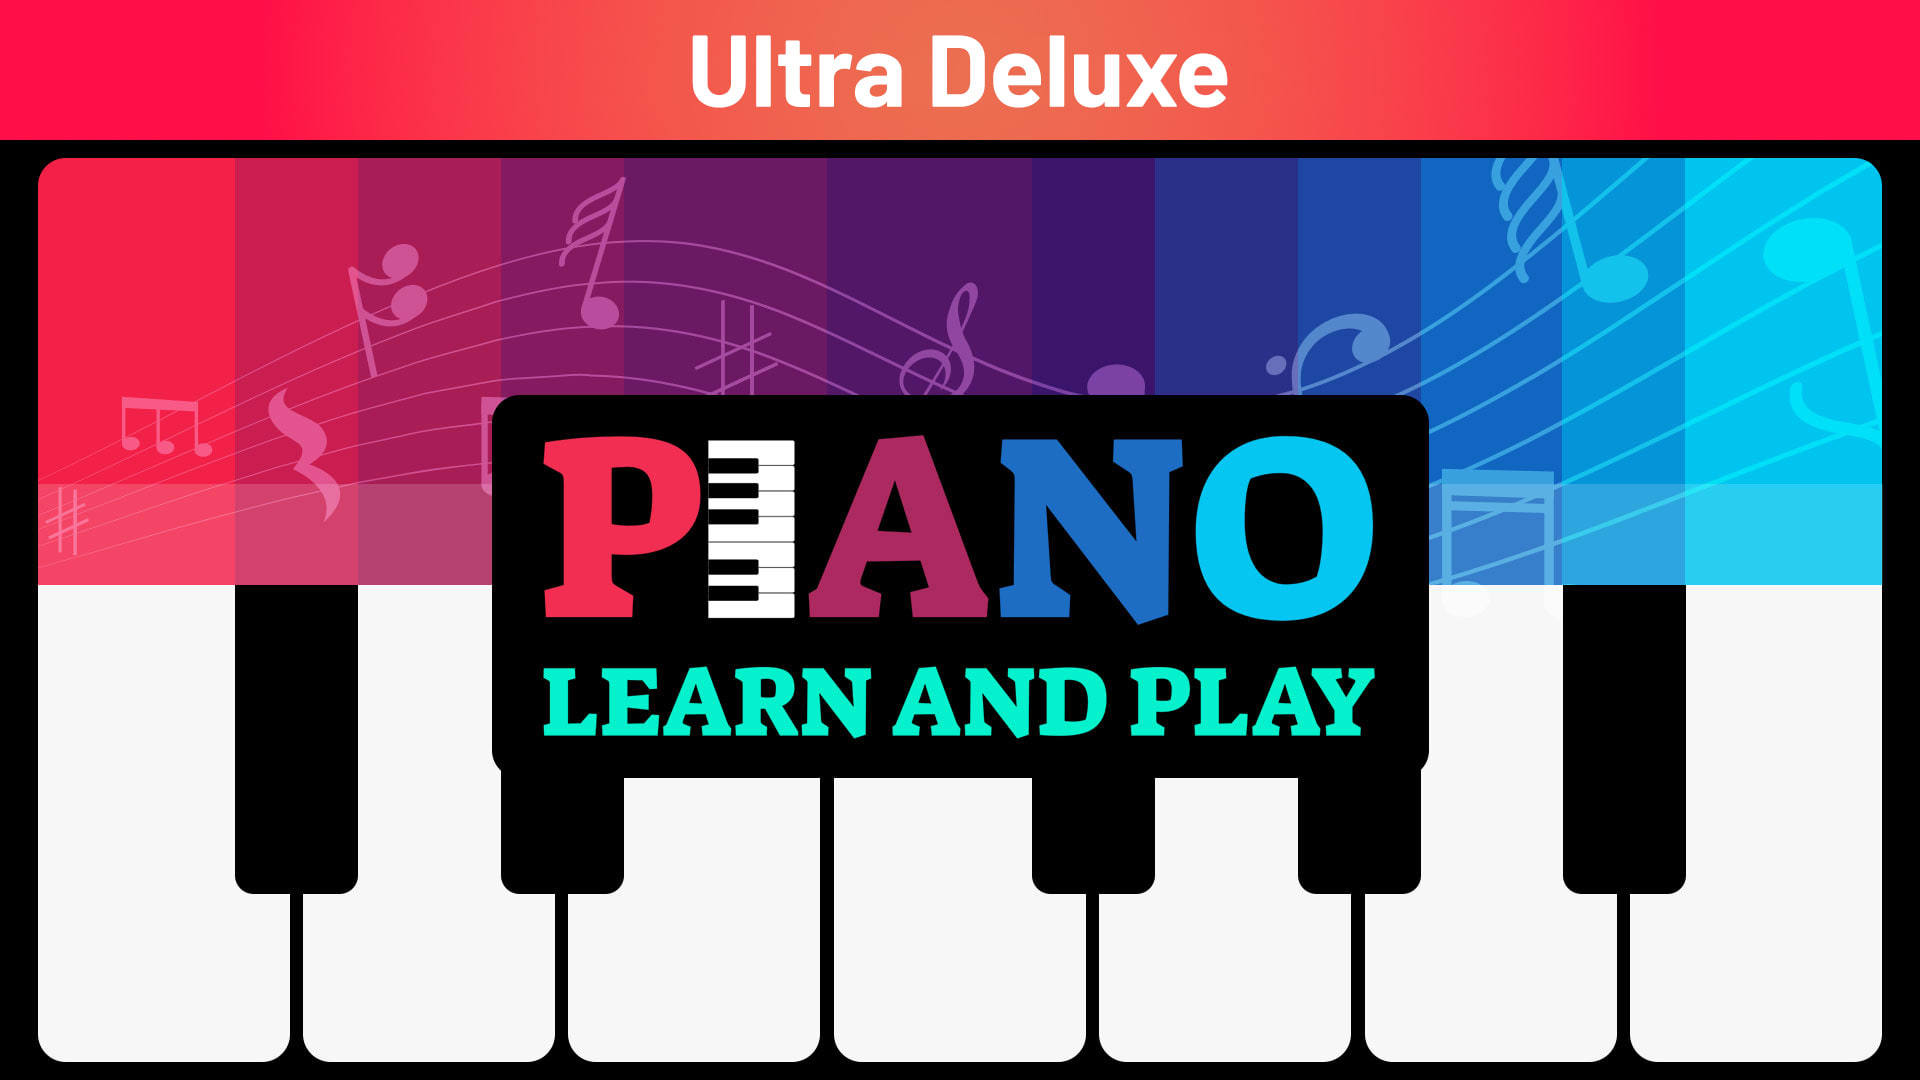 Piano: Learn and Play Ultra Deluxe